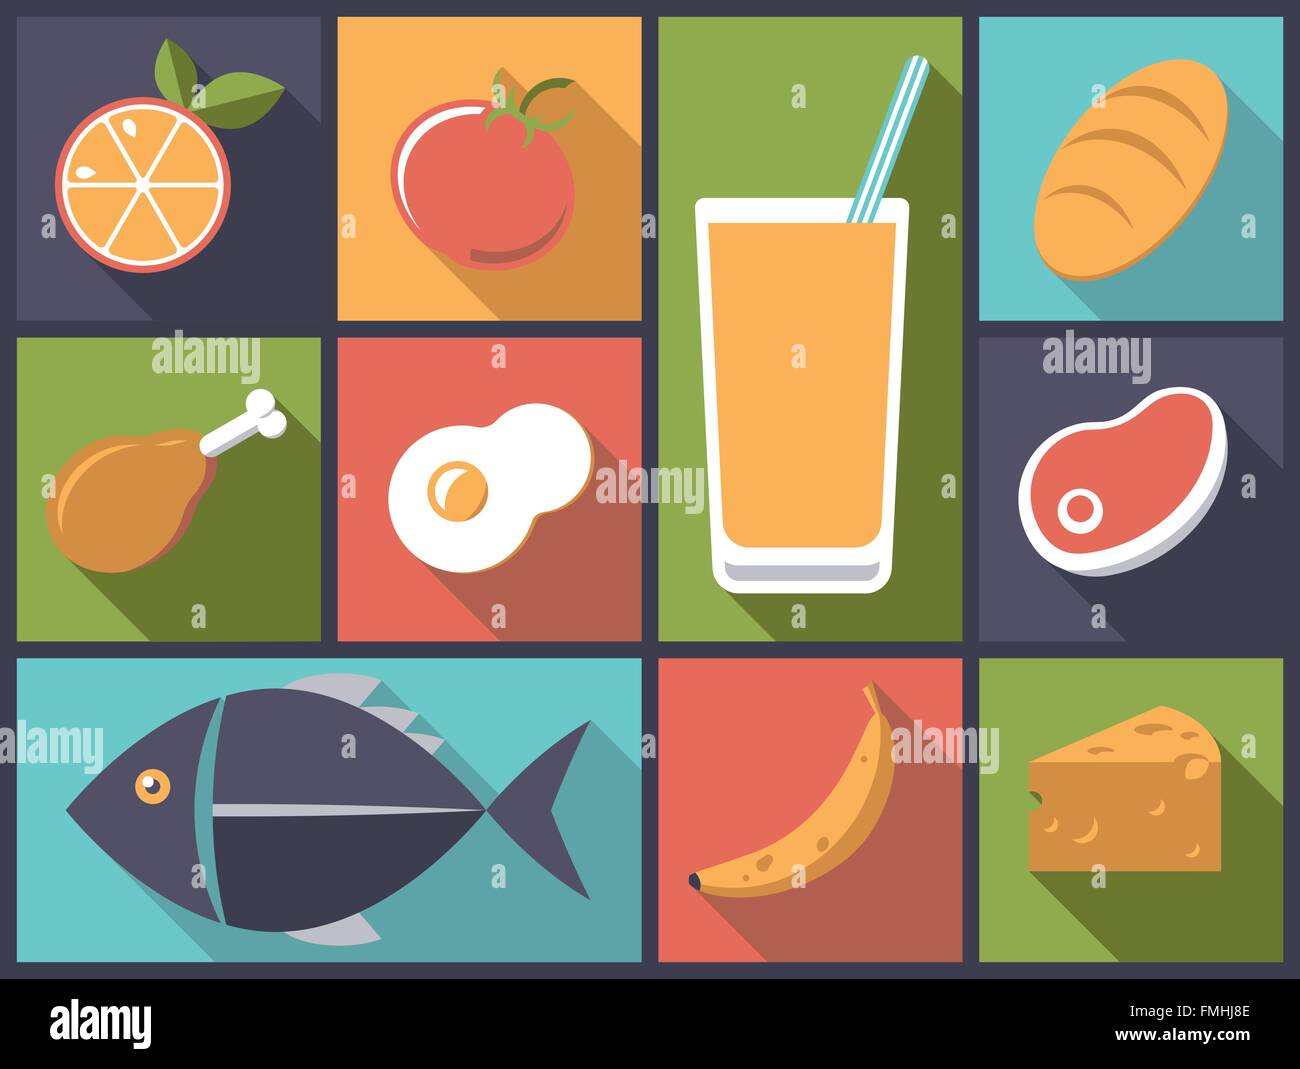 daily food icons Flat design illustration Stock Vector